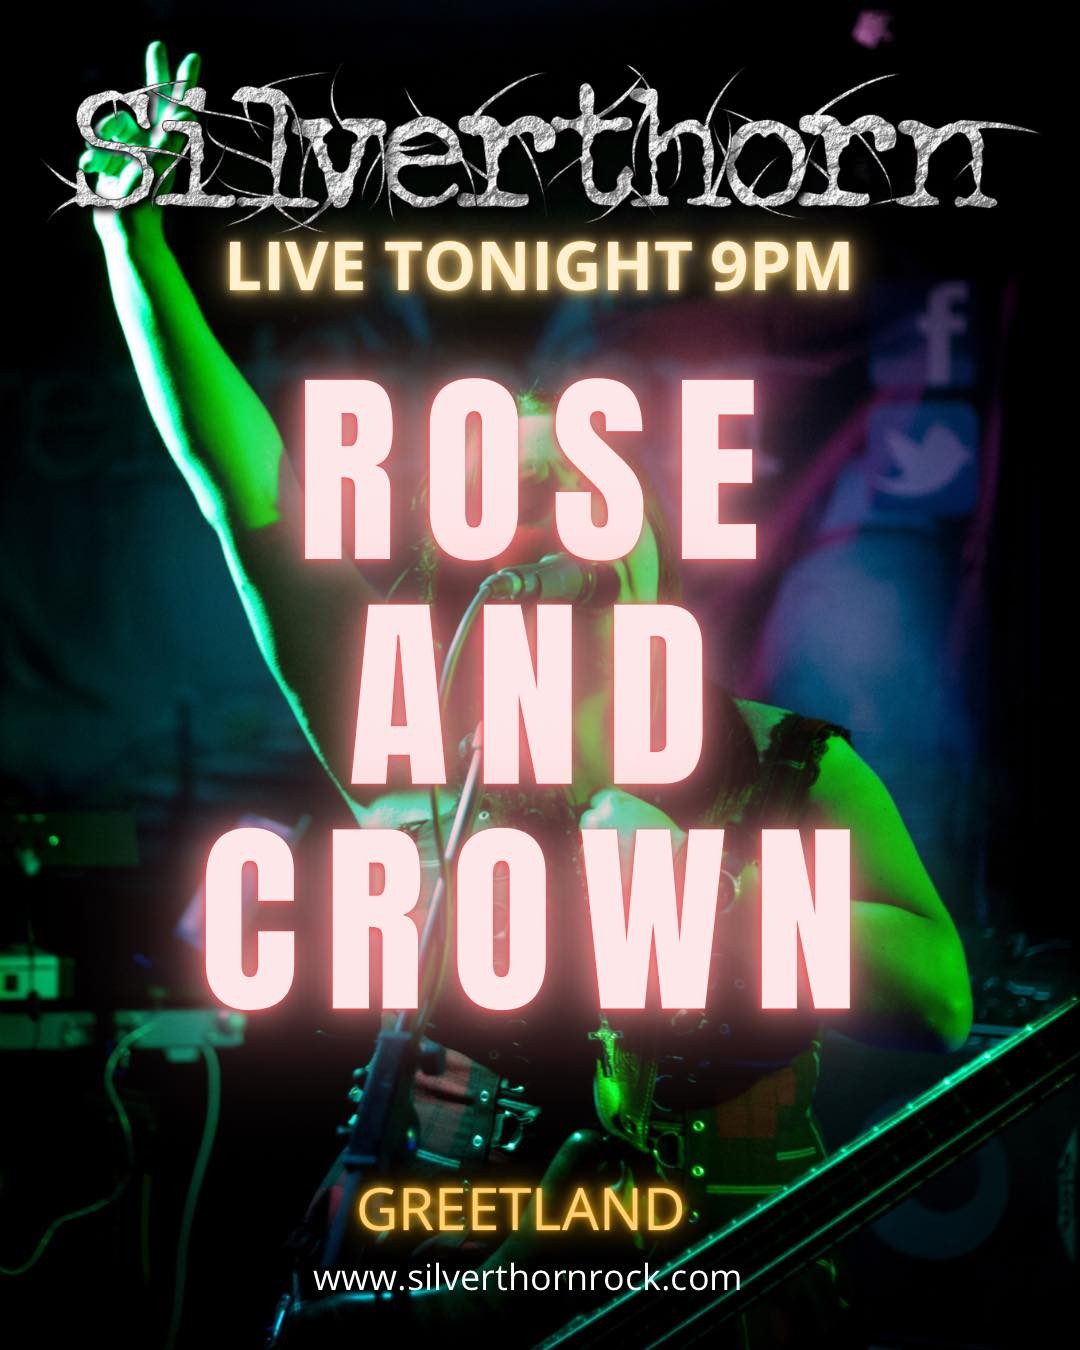 Tonight we’re LIVE at the Rose and Crown Greenland. Let’s see you all down there for a night of ROCK!

#rock #coverband #silverthorn #rocknroll #livemusic #livemusicisbetter #silverthornrock #livemusicislife #rockmusic #LiveMusicIsBack #rockandroll #stadiumrock